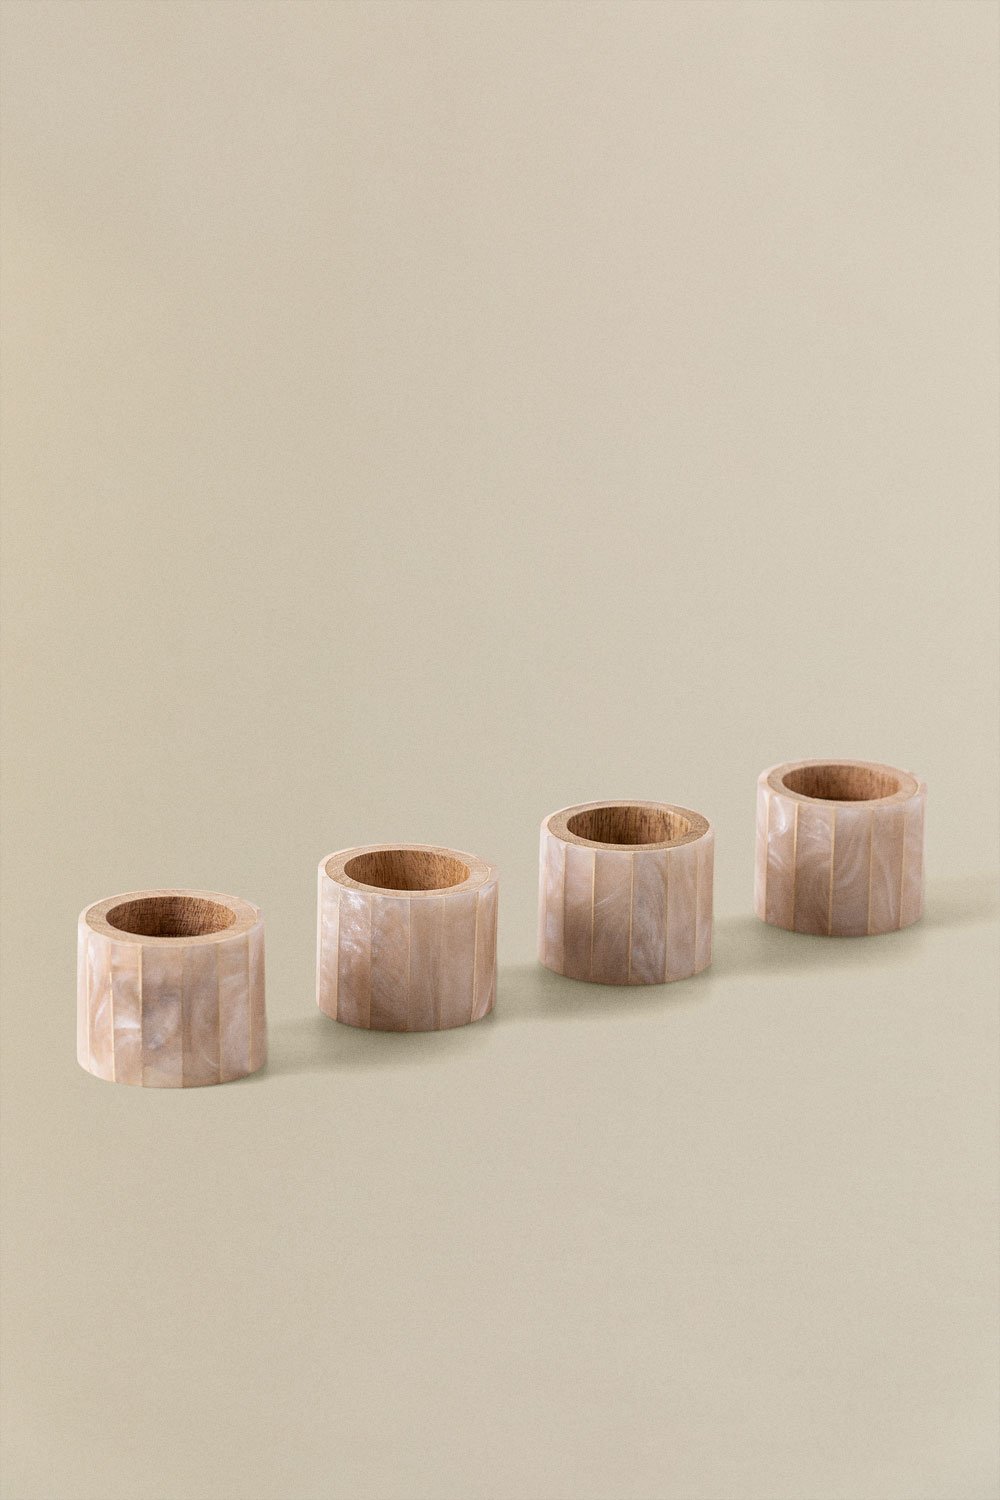 Buy Wooden Napkin Rings Set of 4, Farmhouse Wood Napkin Ring, Handmade  Serviette Buckles Holder for Table Setting, Wedding, Thanksgiving Day and  Home Decor (Wood Circle) Online at Low Prices in India -